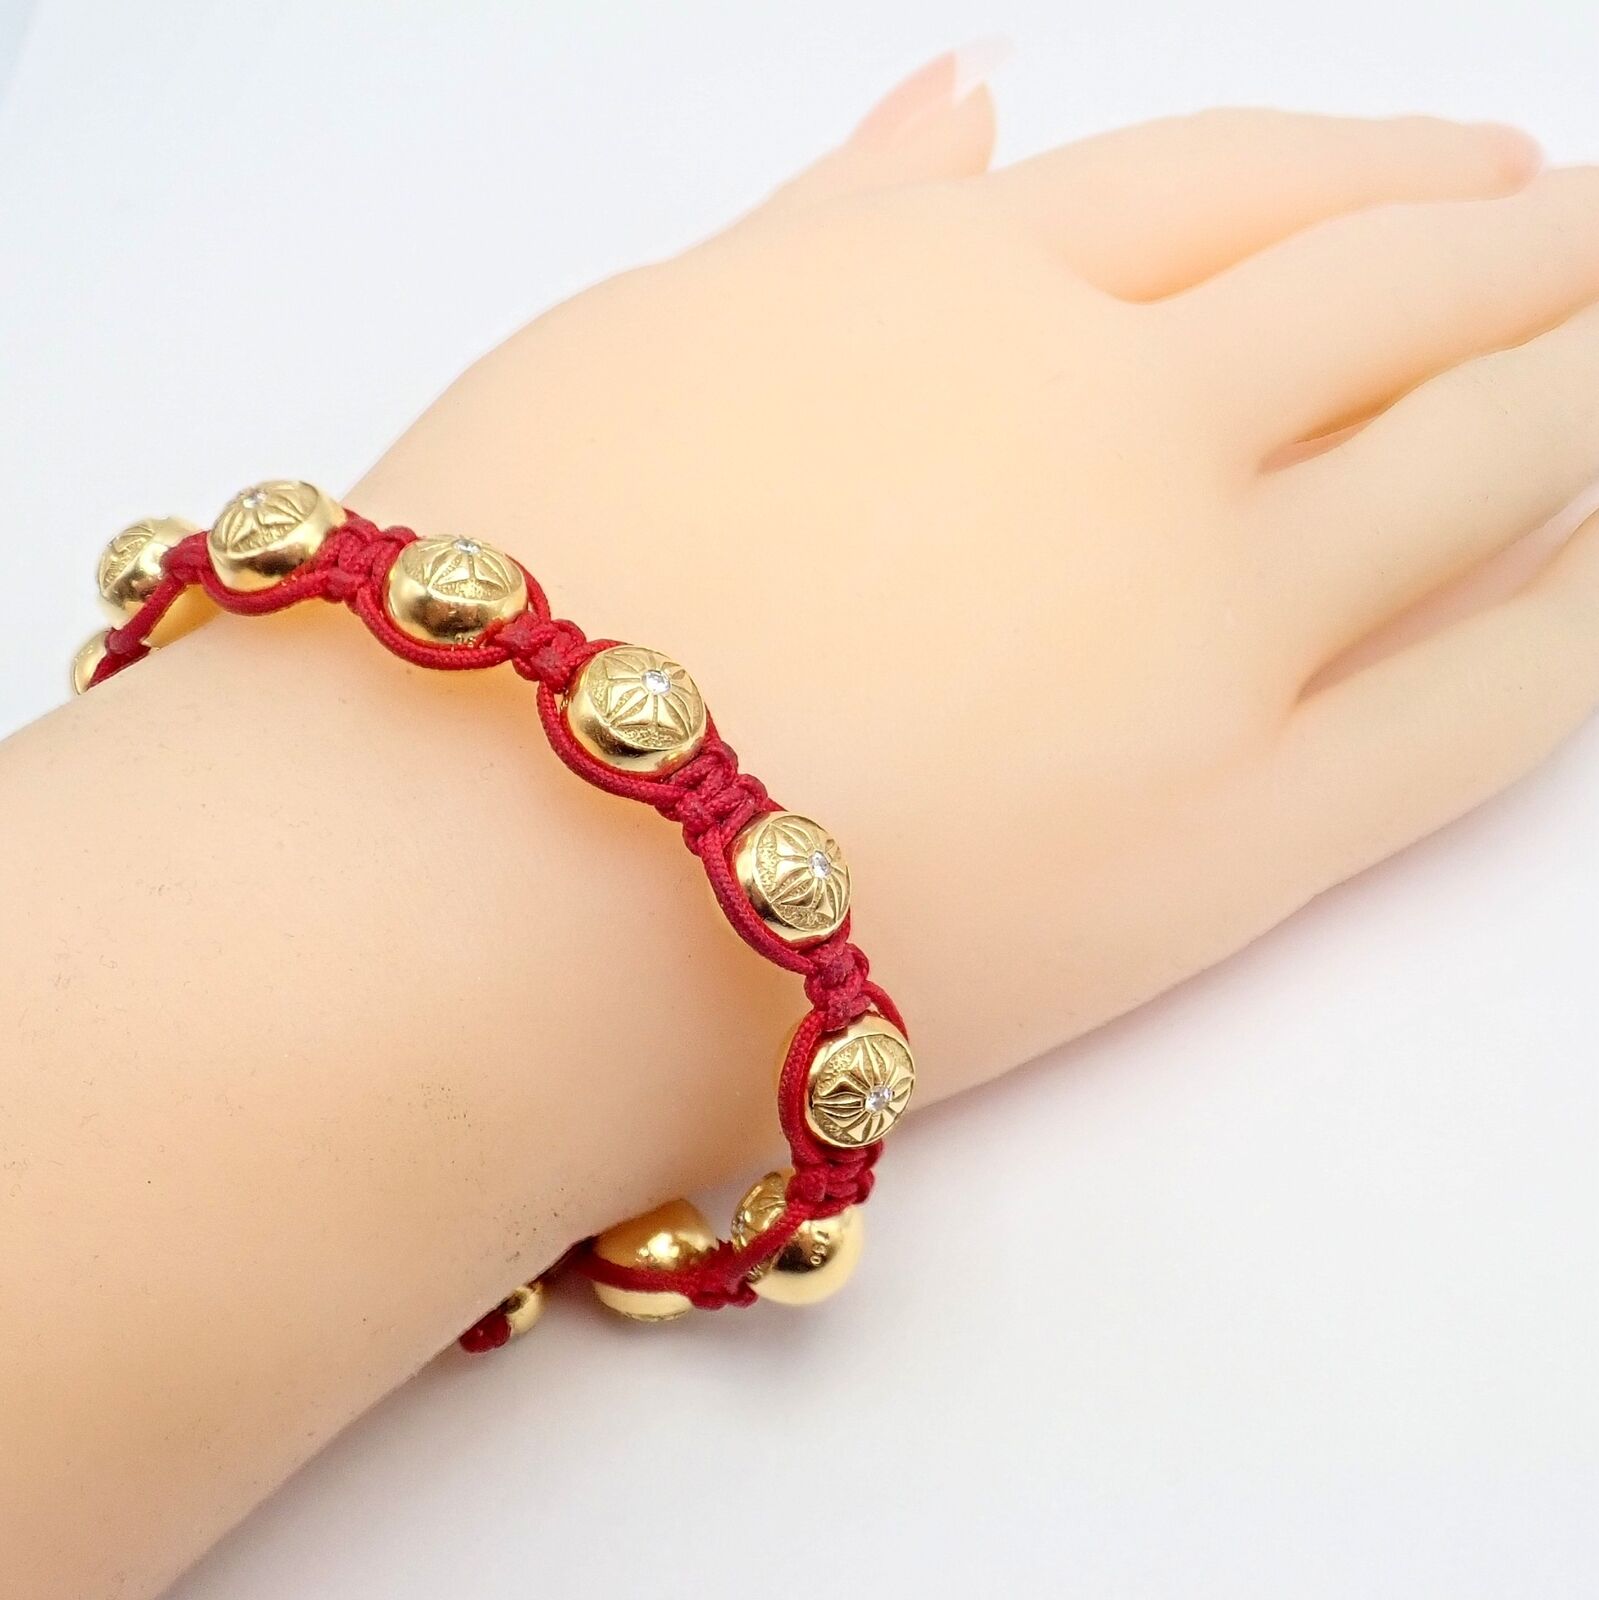 Amazon.com: red coral stone bracelet,red coral stone shamballa bracelet,red  bracelet,yoga,meditation,10mm stone beads,man,women,ethnic bracelet : Arts,  Crafts & Sewing